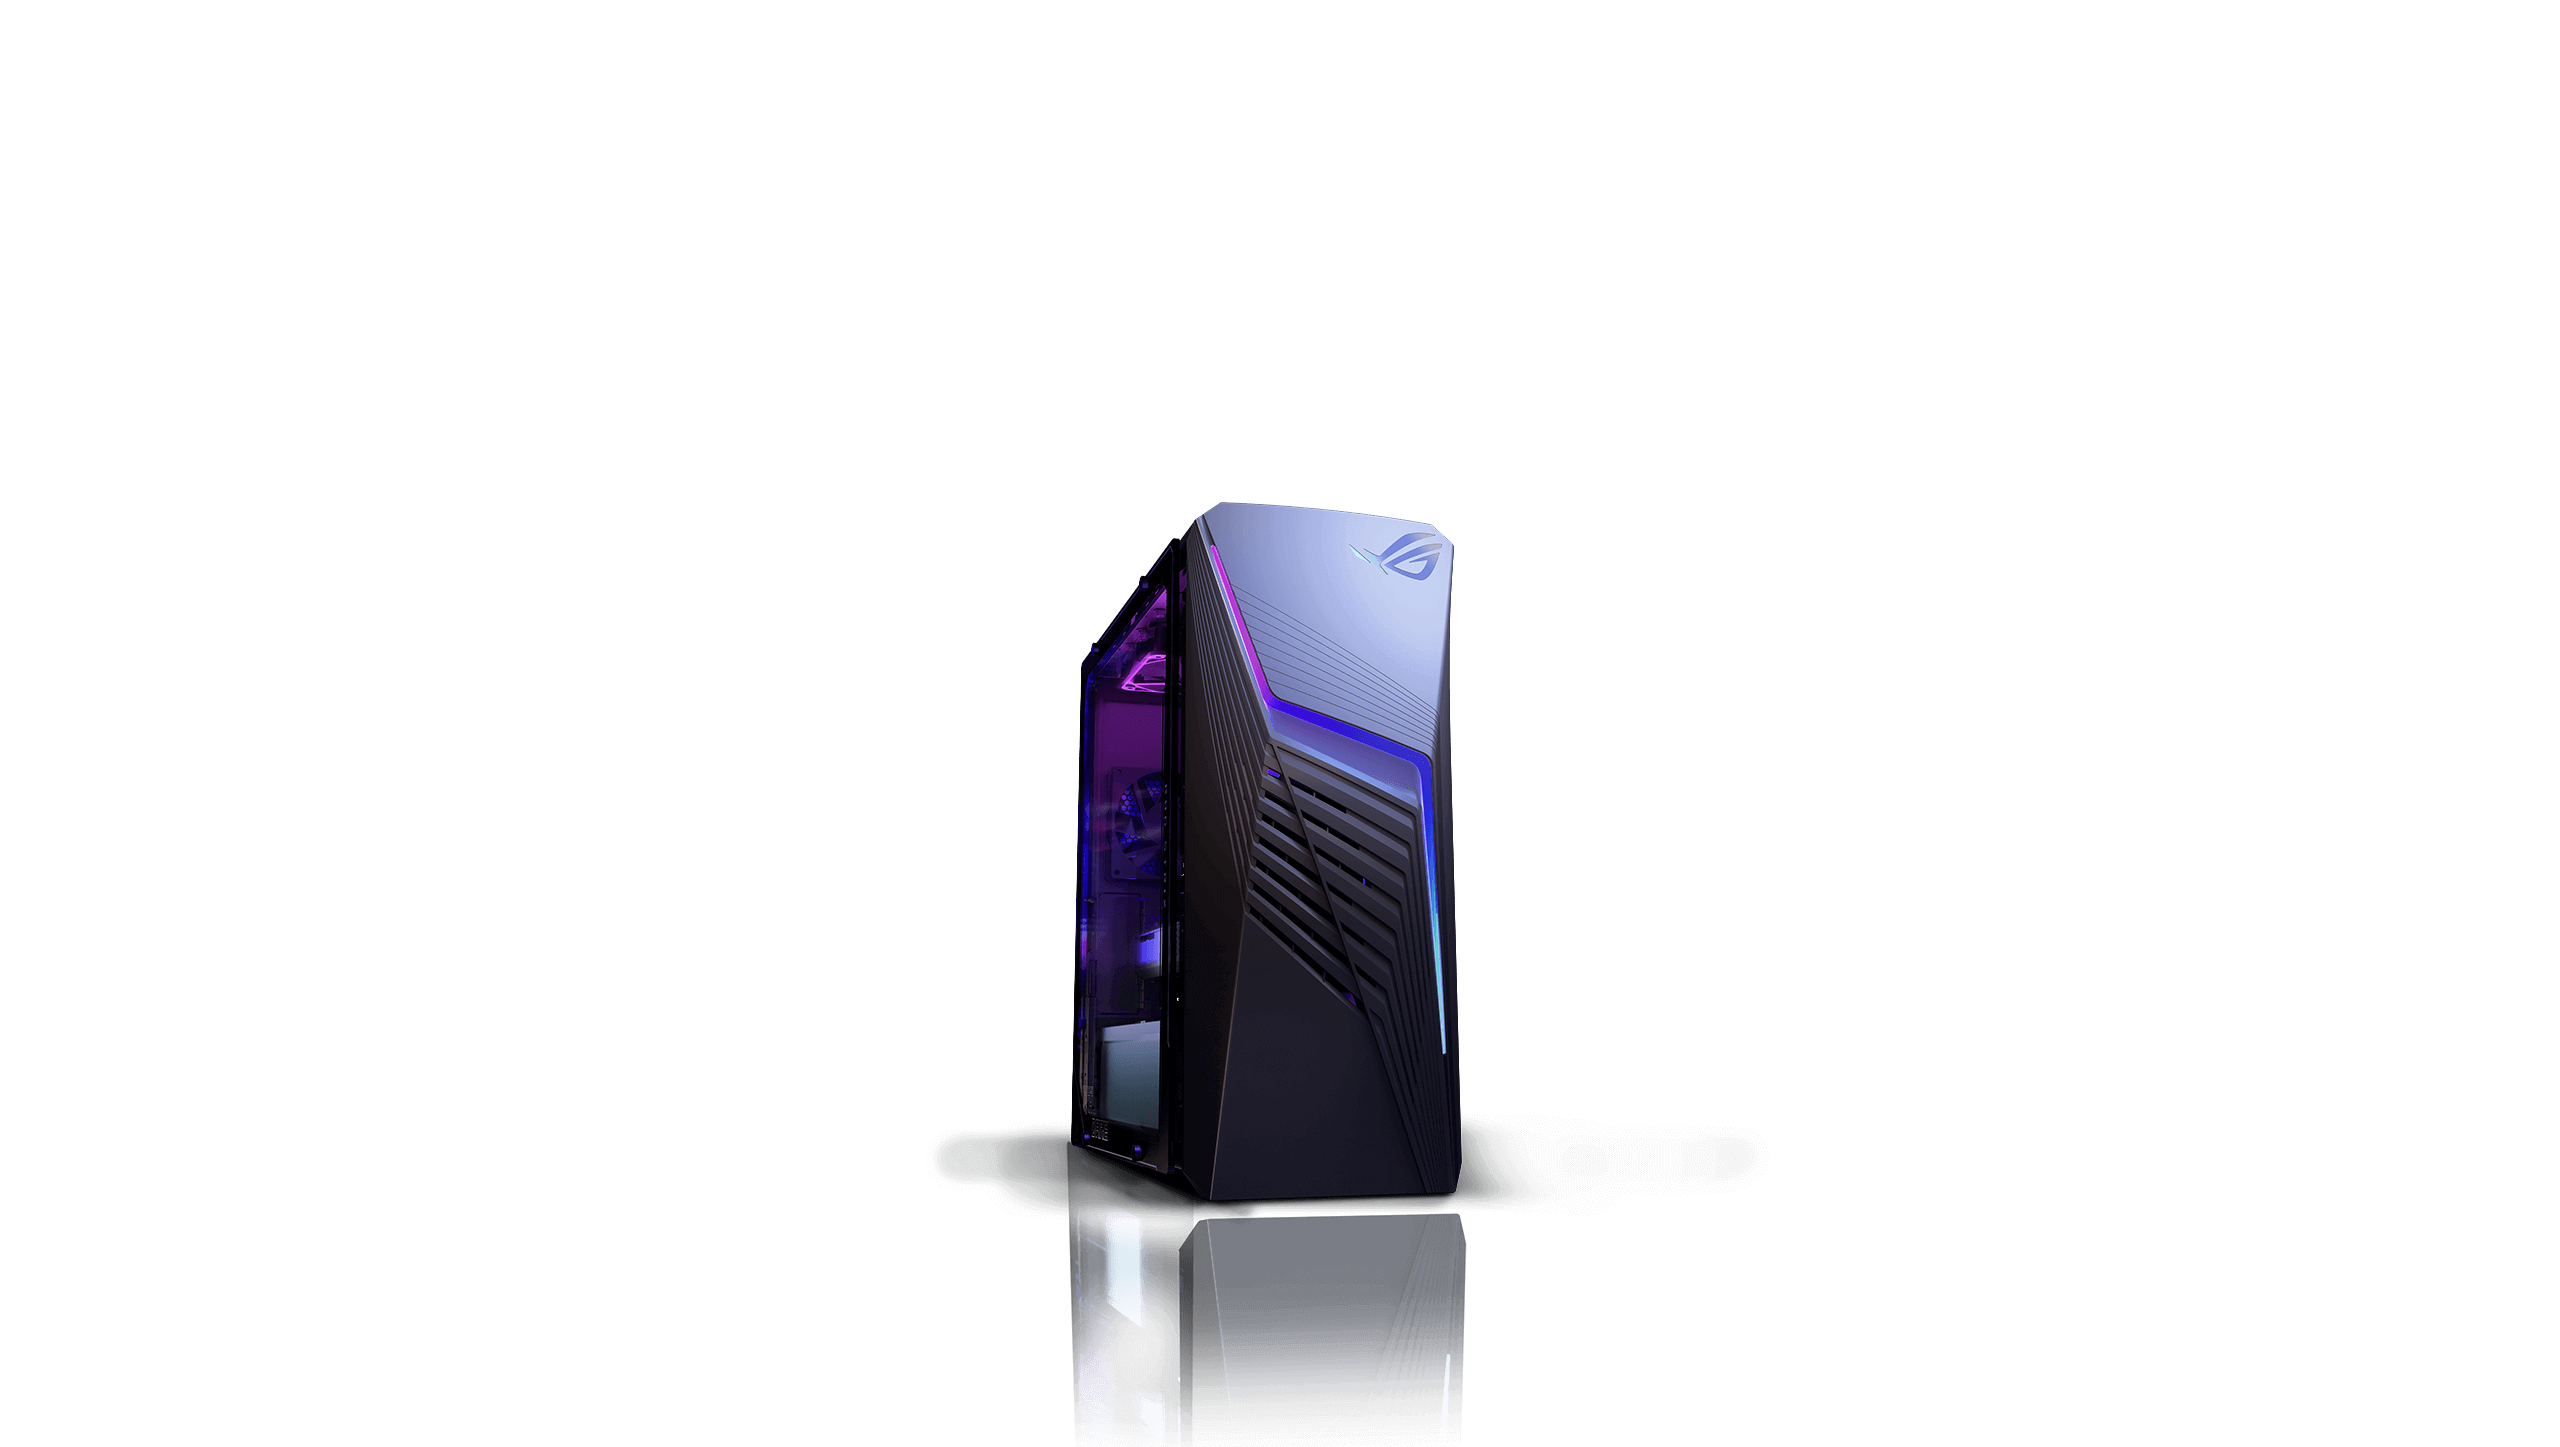 The Strix G13CH on a street, flanked by logos for Intel and NVIDIA, with a cityscape in the background.